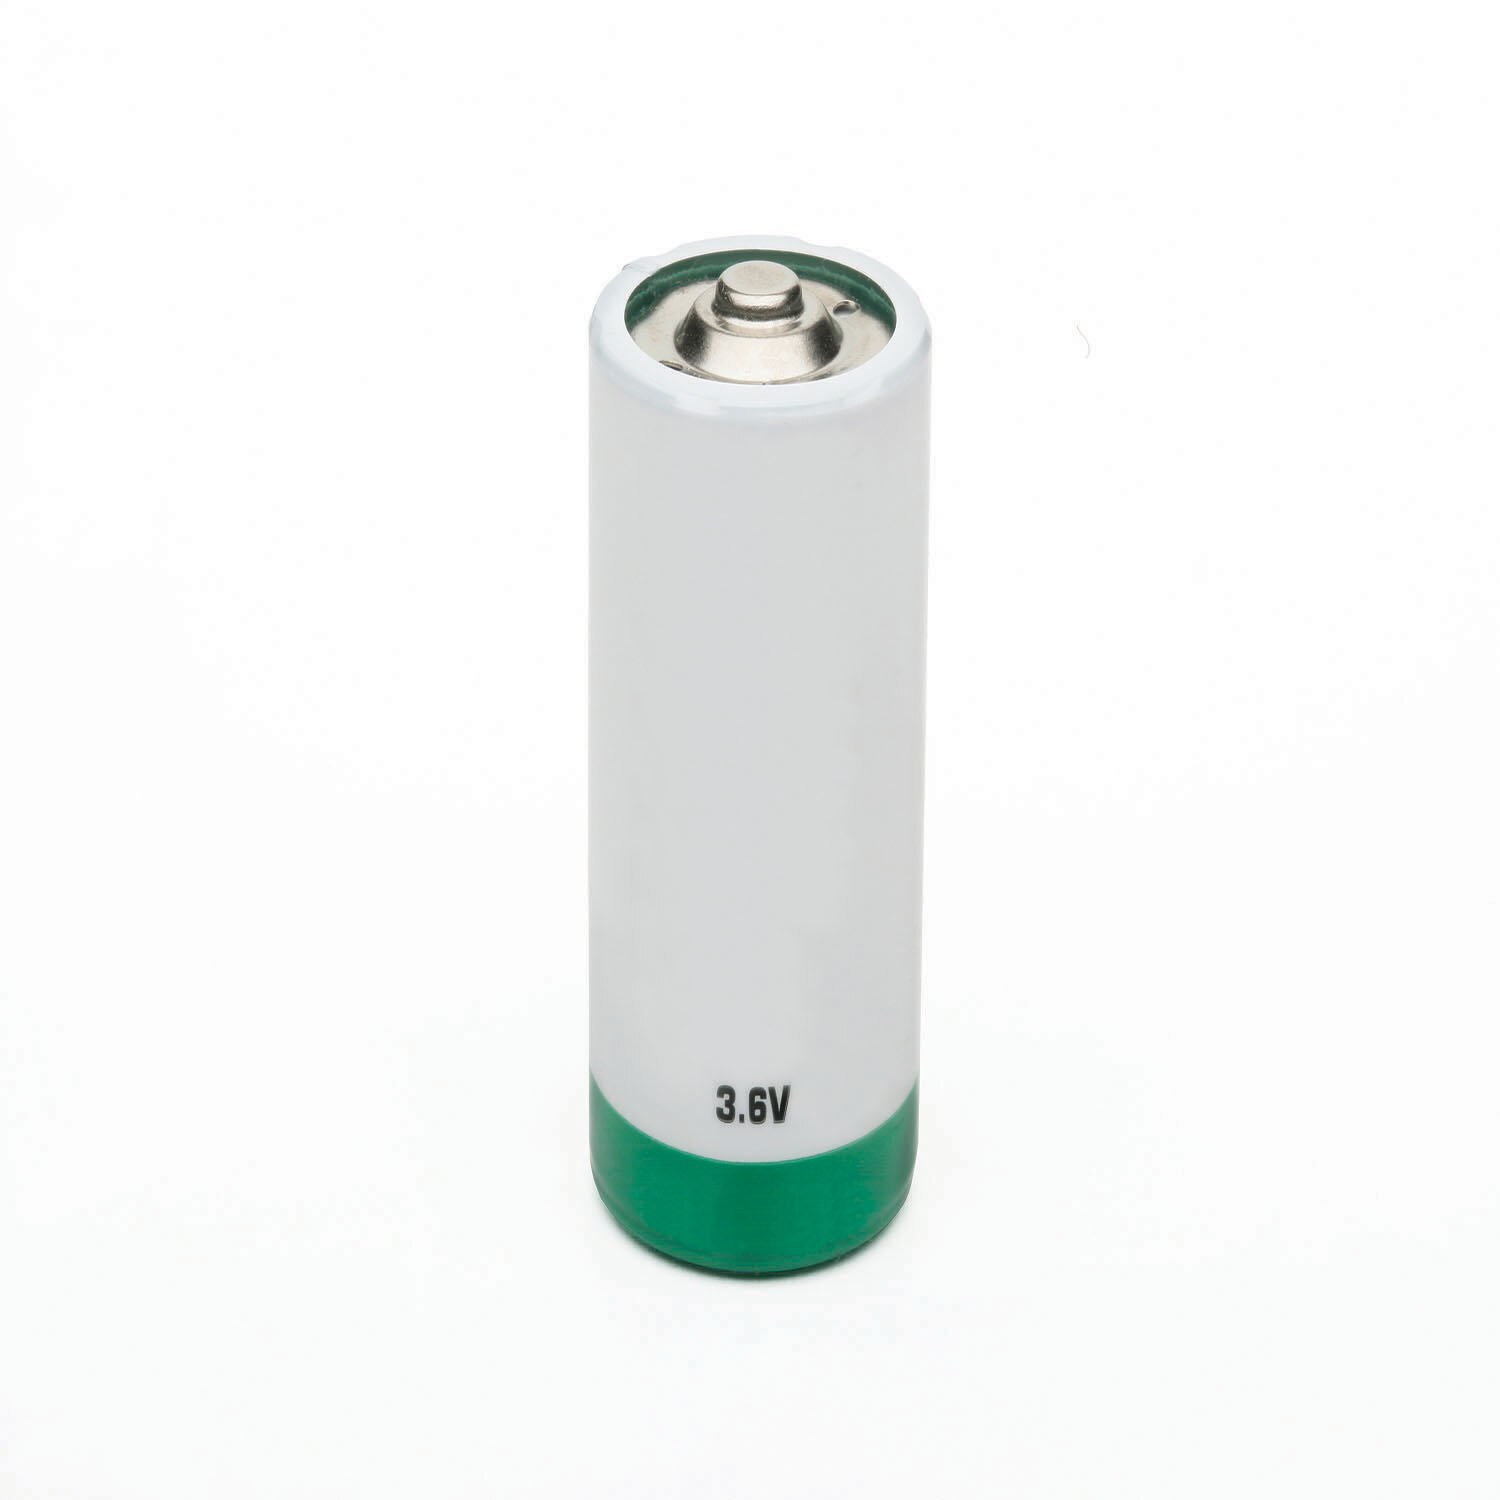 Battery, Non-Rechargeable, Cylindrical, 3.6V, Lithium, EA/1